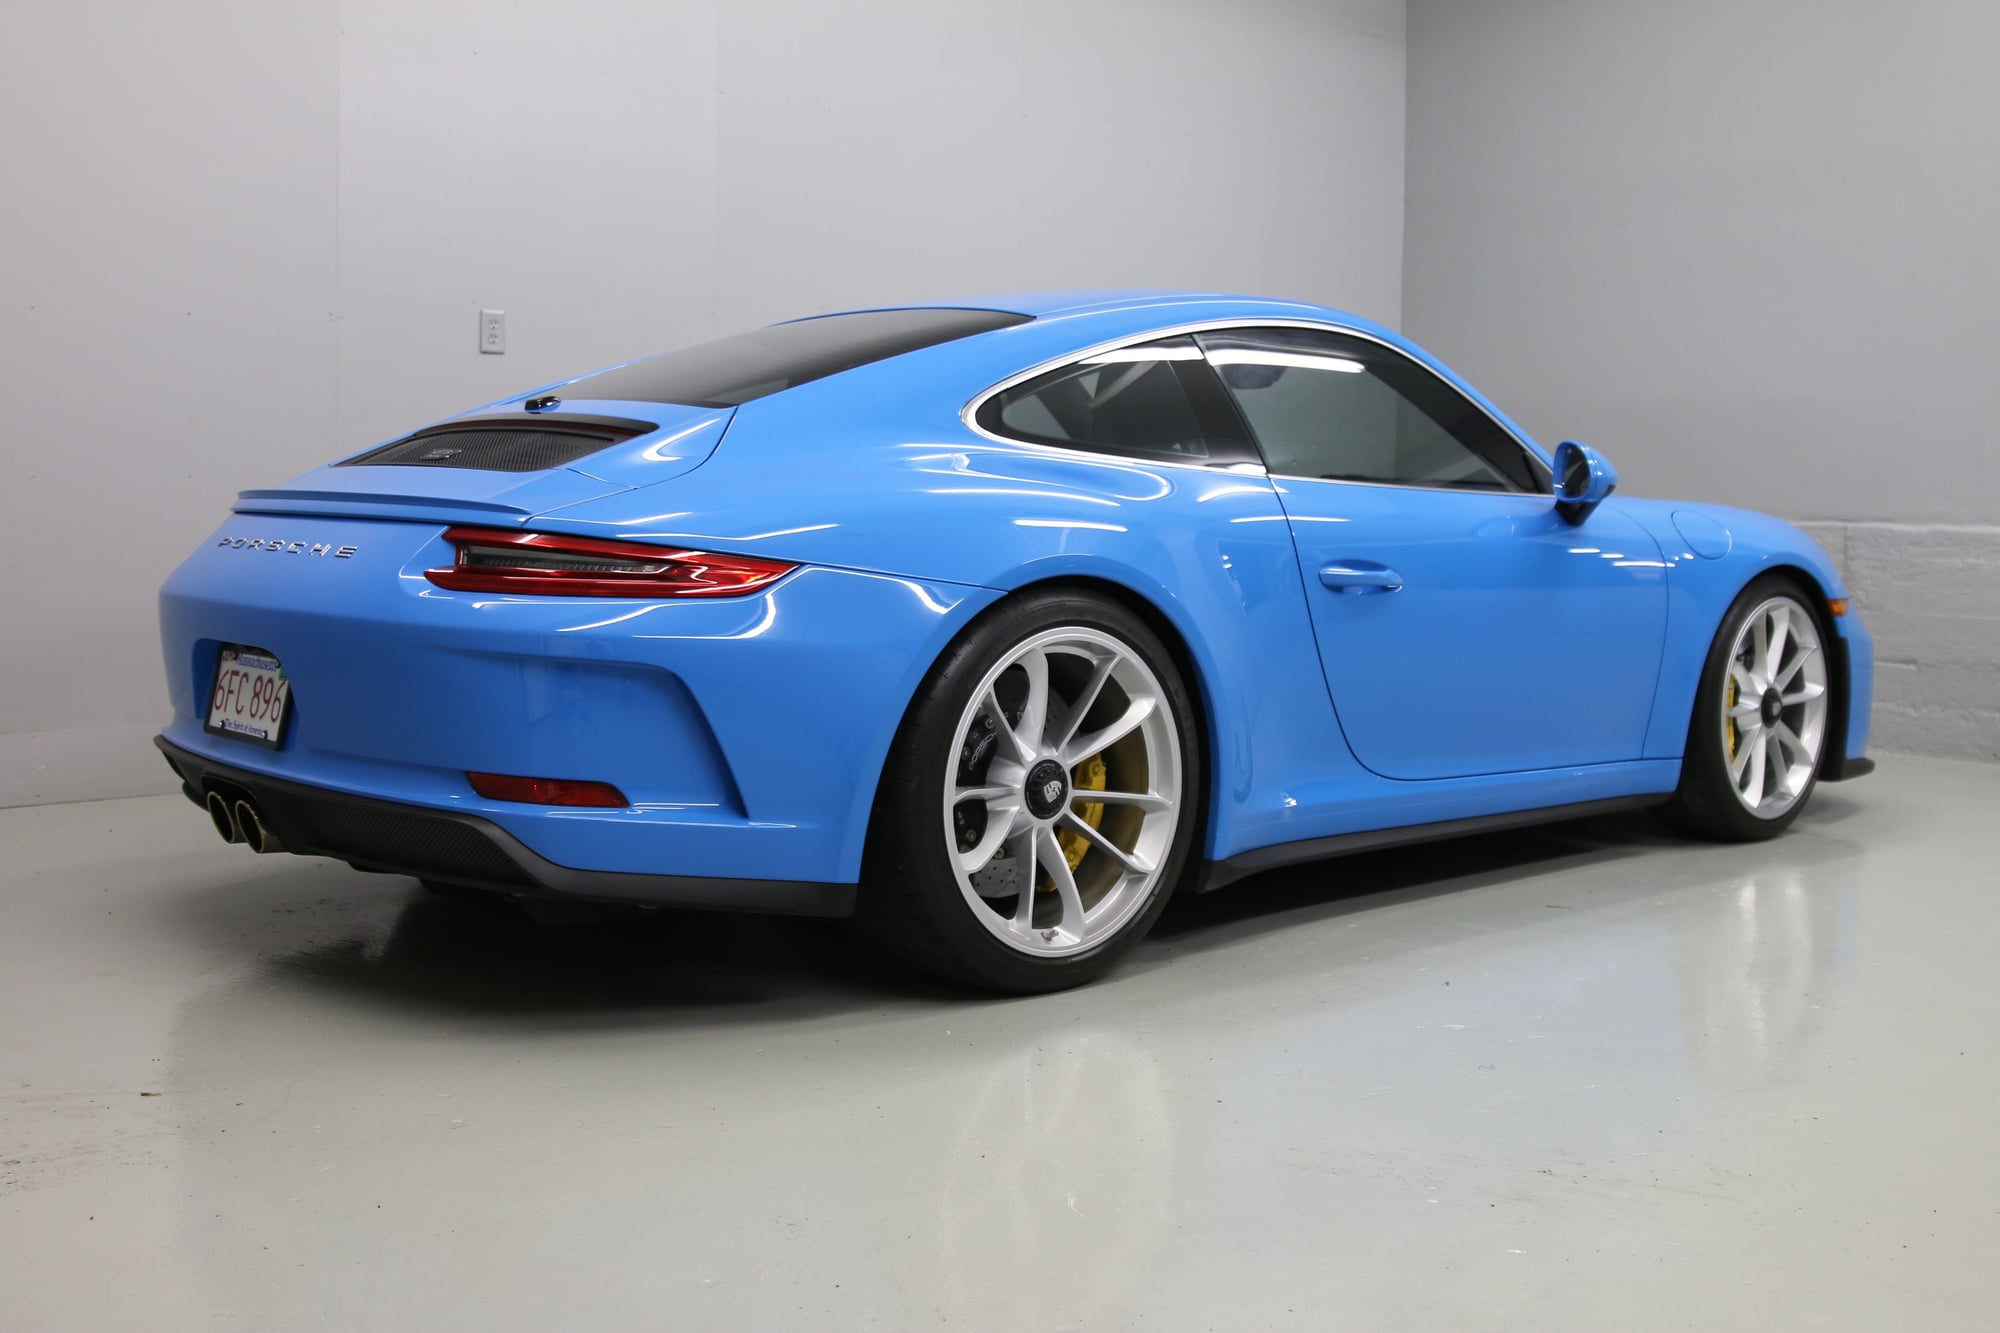 2018 Porsche GT3 - 2018 GT3 Touring PTS Mexico Blue - Used - VIN WP0AC2A90JS176153 - 6,750 Miles - 6 cyl - 2WD - Manual - Coupe - Blue - Boston, MA 02110, United States